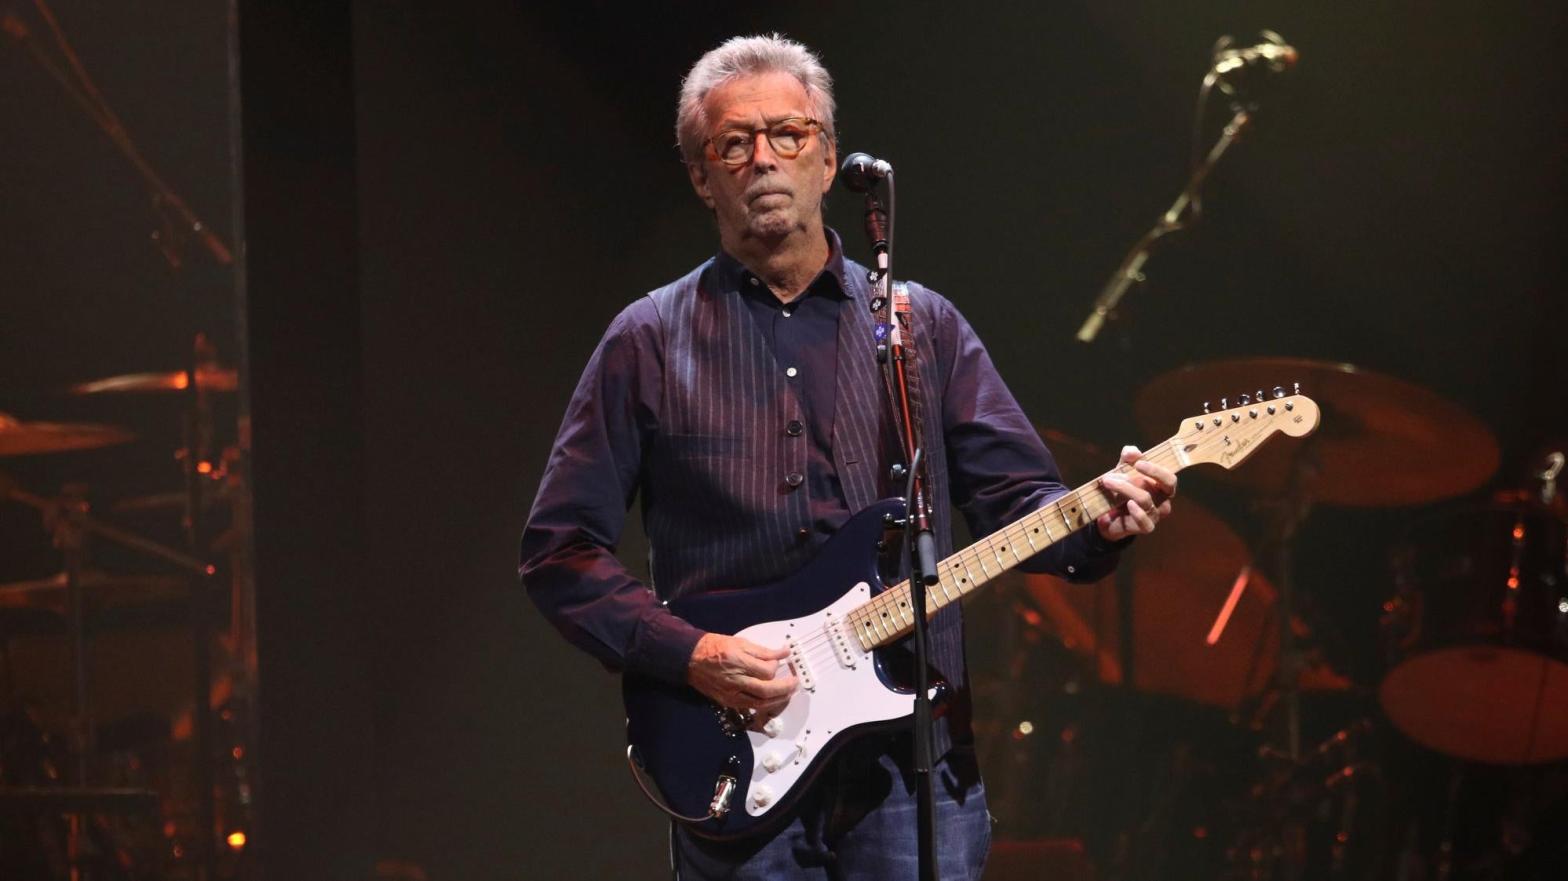 Notorious prick Eric Clapton performs at Gas South Arena on September 23, 2021, in Atlanta. (Photo: Robb Cohen / Invision / AP, AP)